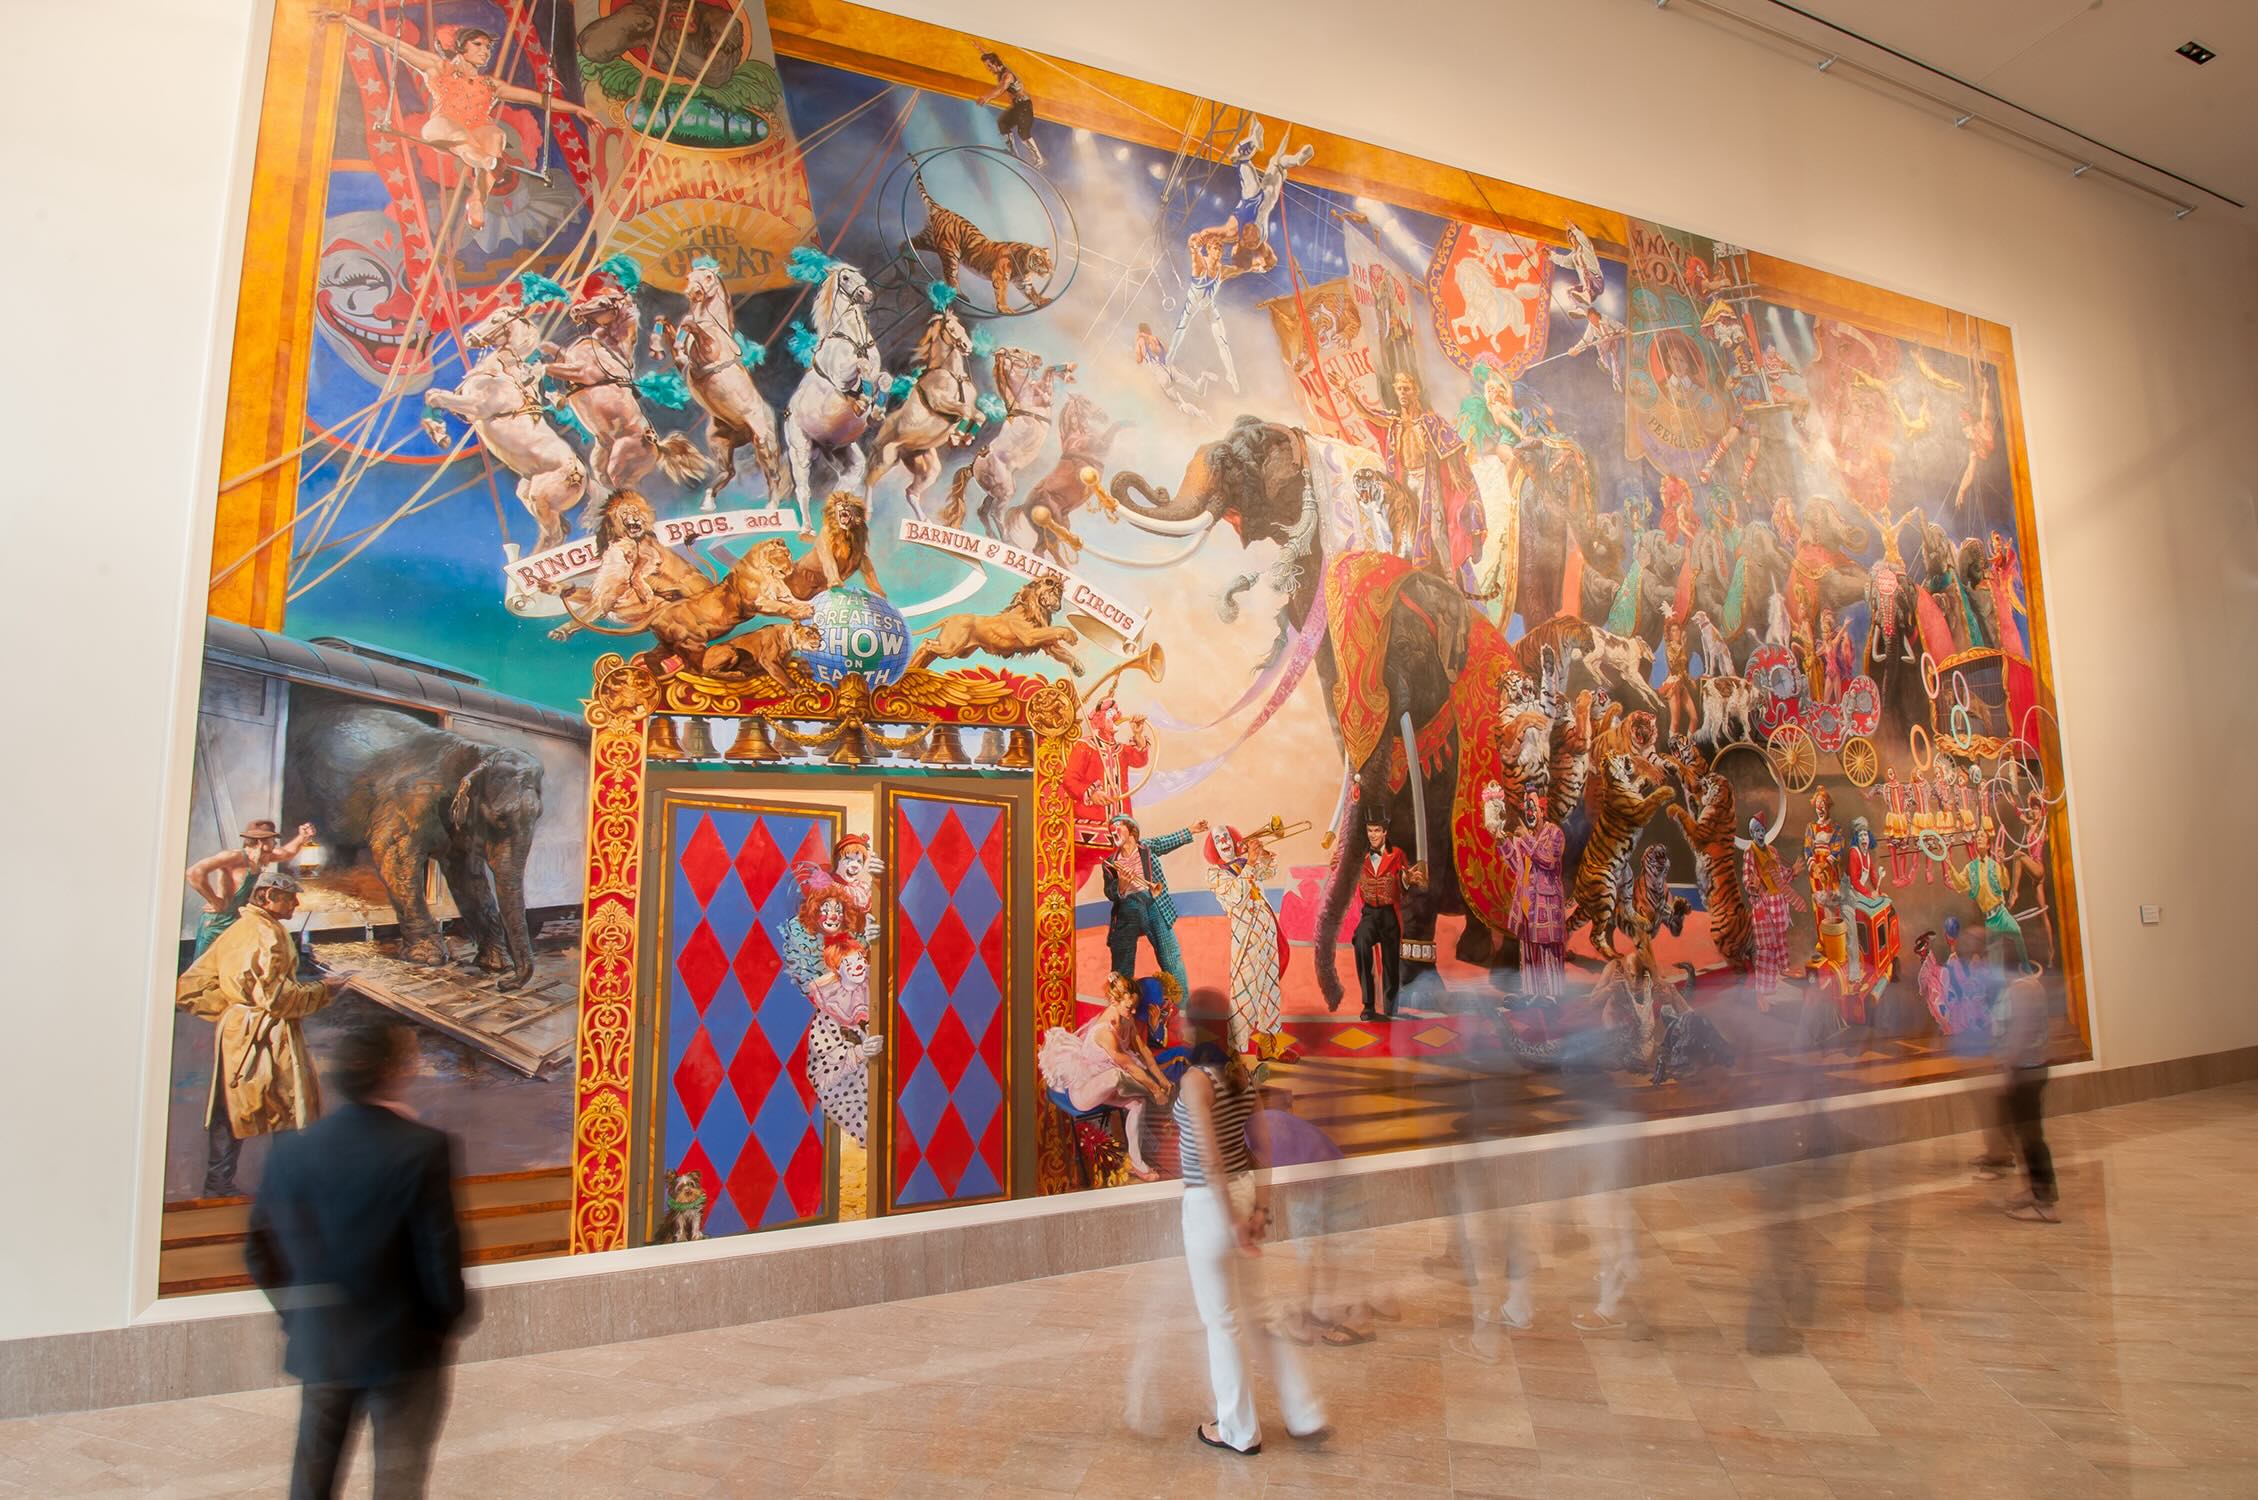 The Greatest Show on Earth, a mural two stories tall by William Woodward, was recently given to the John and Mable Ringling Museum of Art by Feld Entertainment and the Feld family.